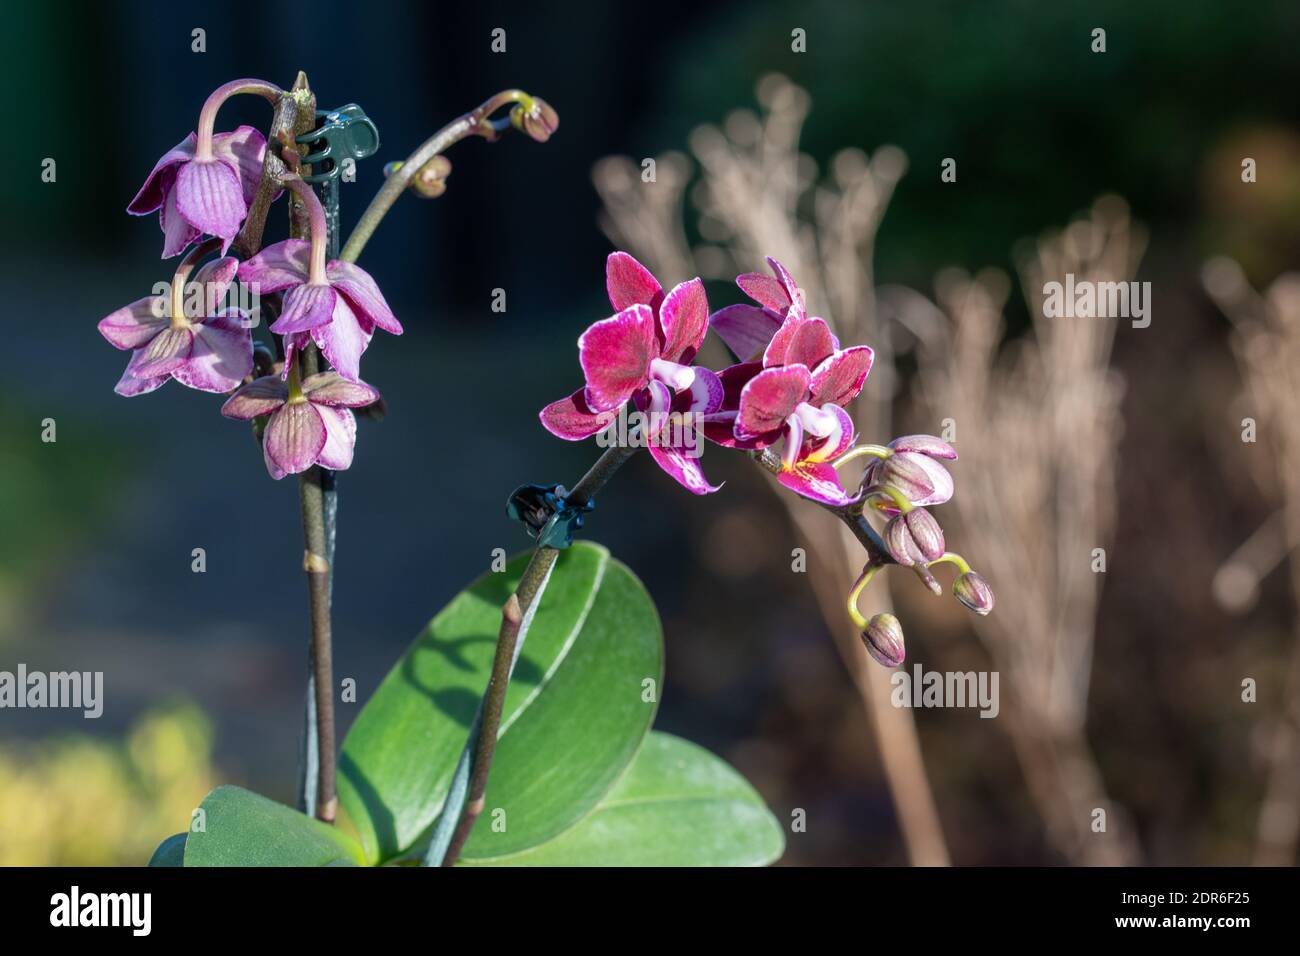 The flower of an orchid. Stock Photo